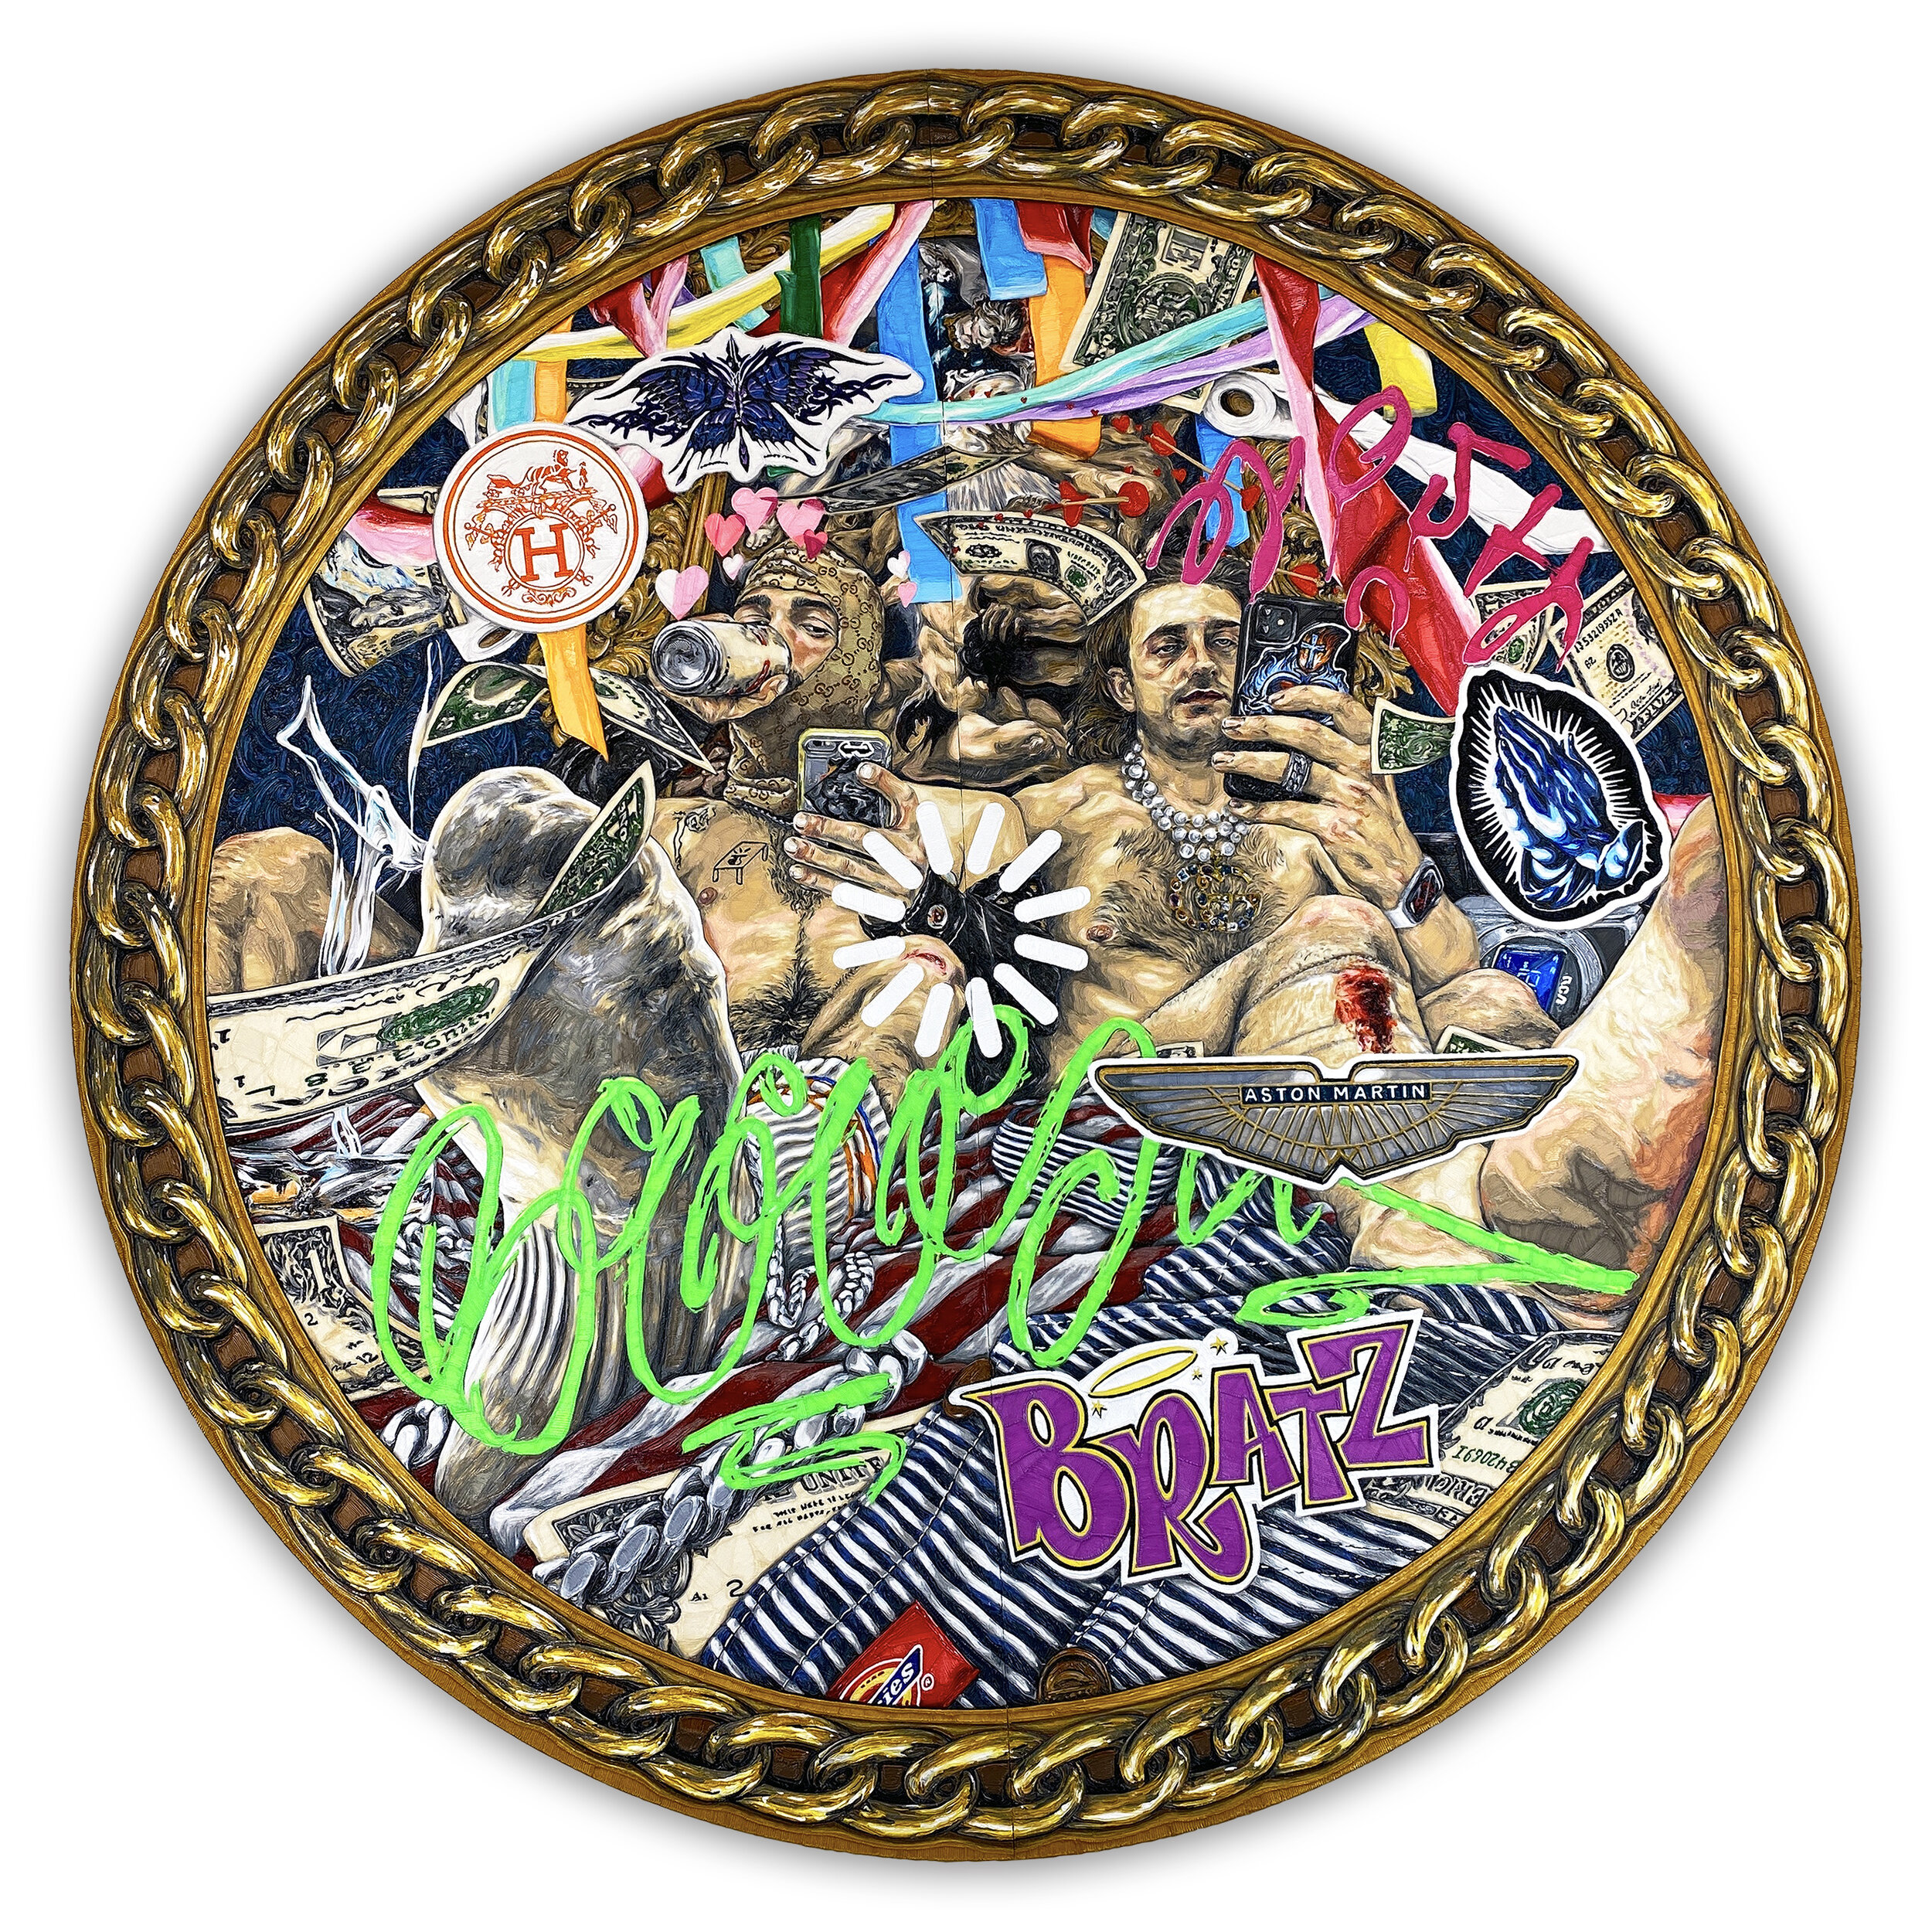  BOYZ OF THE WILD, 73 inches in diameter, PLA on panel, 2020 